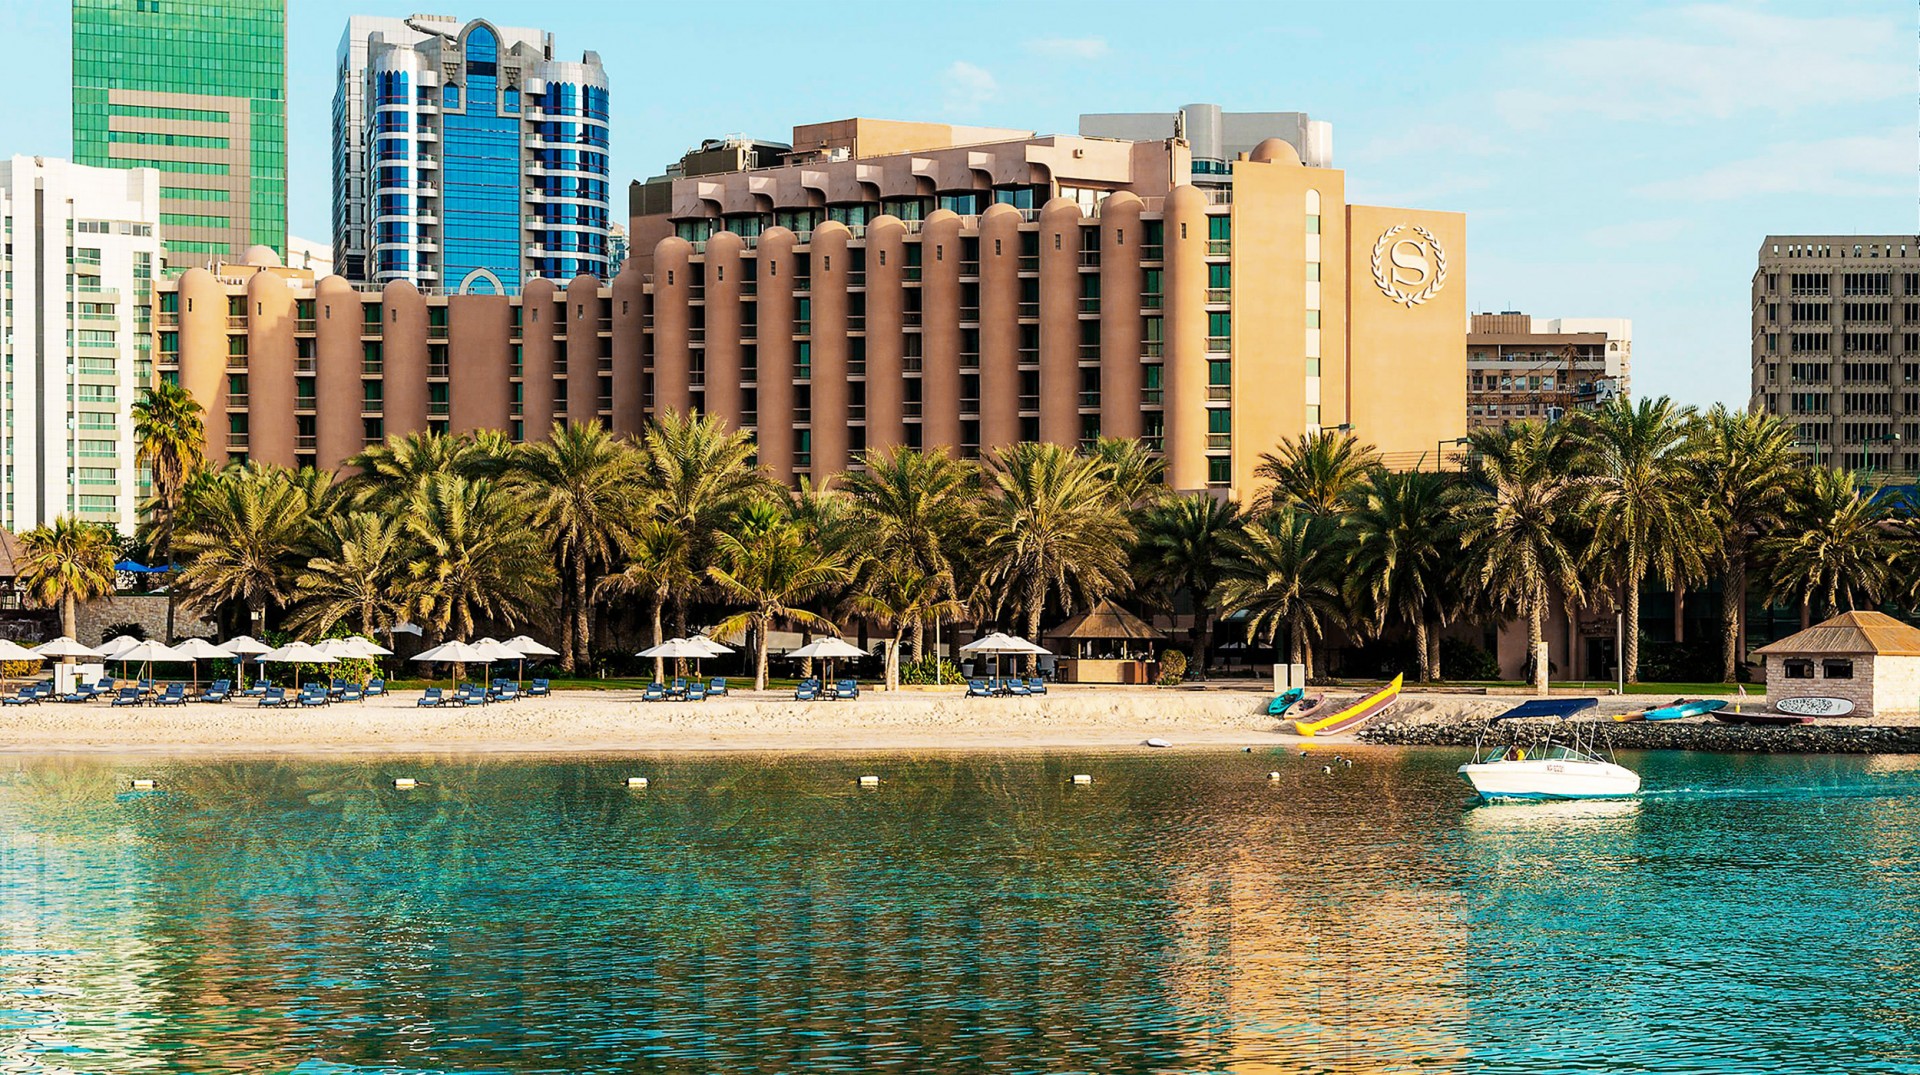 5 Star Hotel And Resort Sheraton Find The Best Hotels In